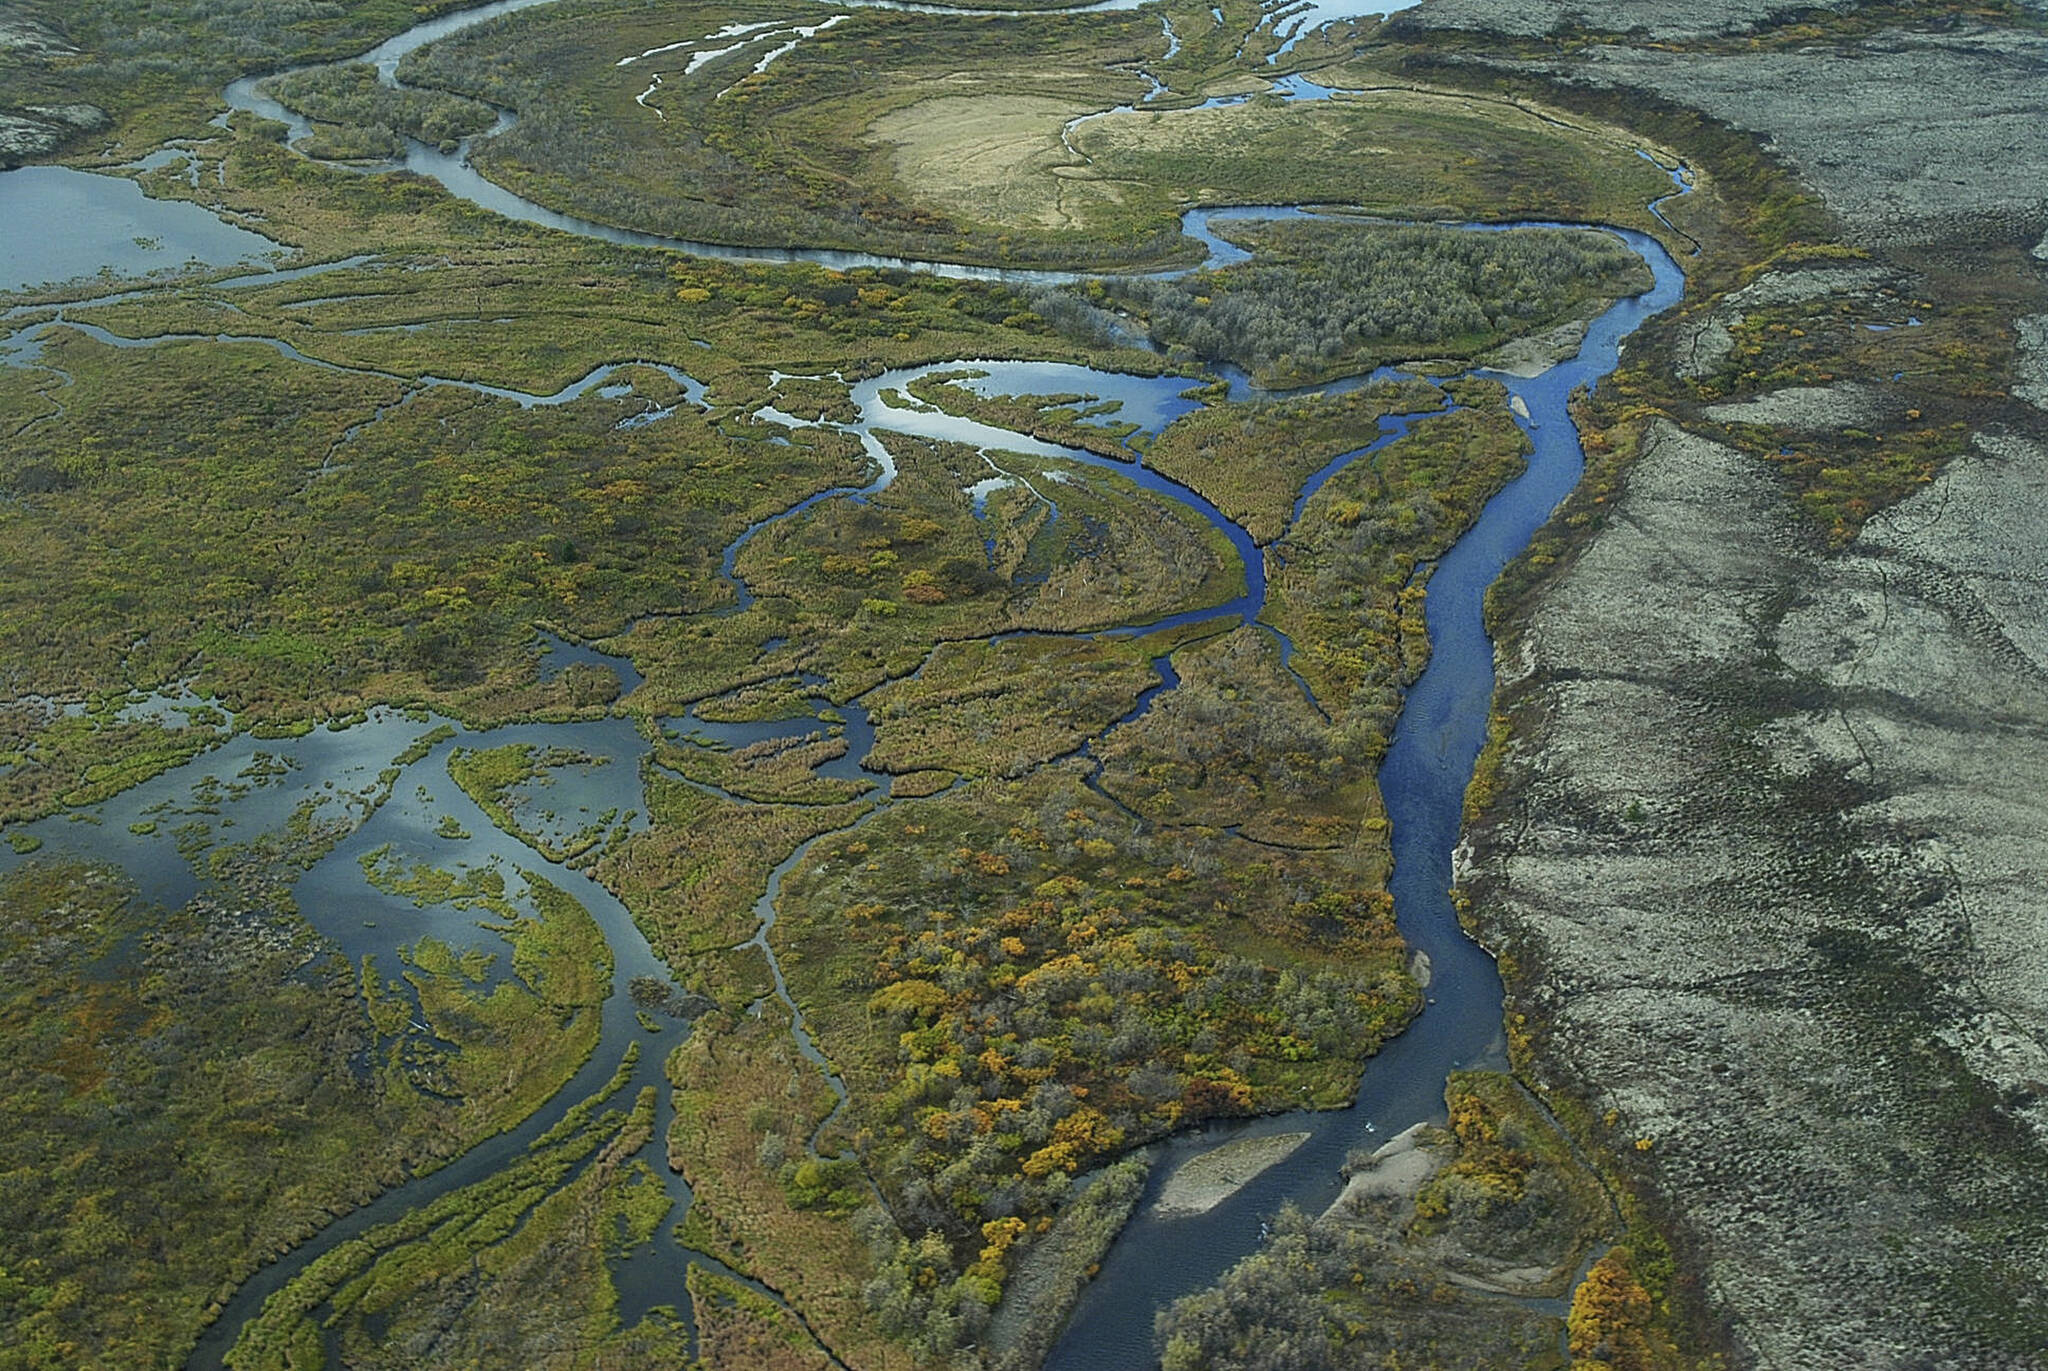 This September 2011 aerial photo provided by the Environmental Protection Agency, shows the Bristol Bay watershed in Alaska. The U.S. Environmental Protection Agency on Tuesday, Jan. 31, 2023, effectively vetoed a proposed copper and gold mine in the remote region of southwest Alaska that is coveted by mining interests but that also supports the world’s largest sockeye salmon fishery. (Joseph Ebersole / EPA)